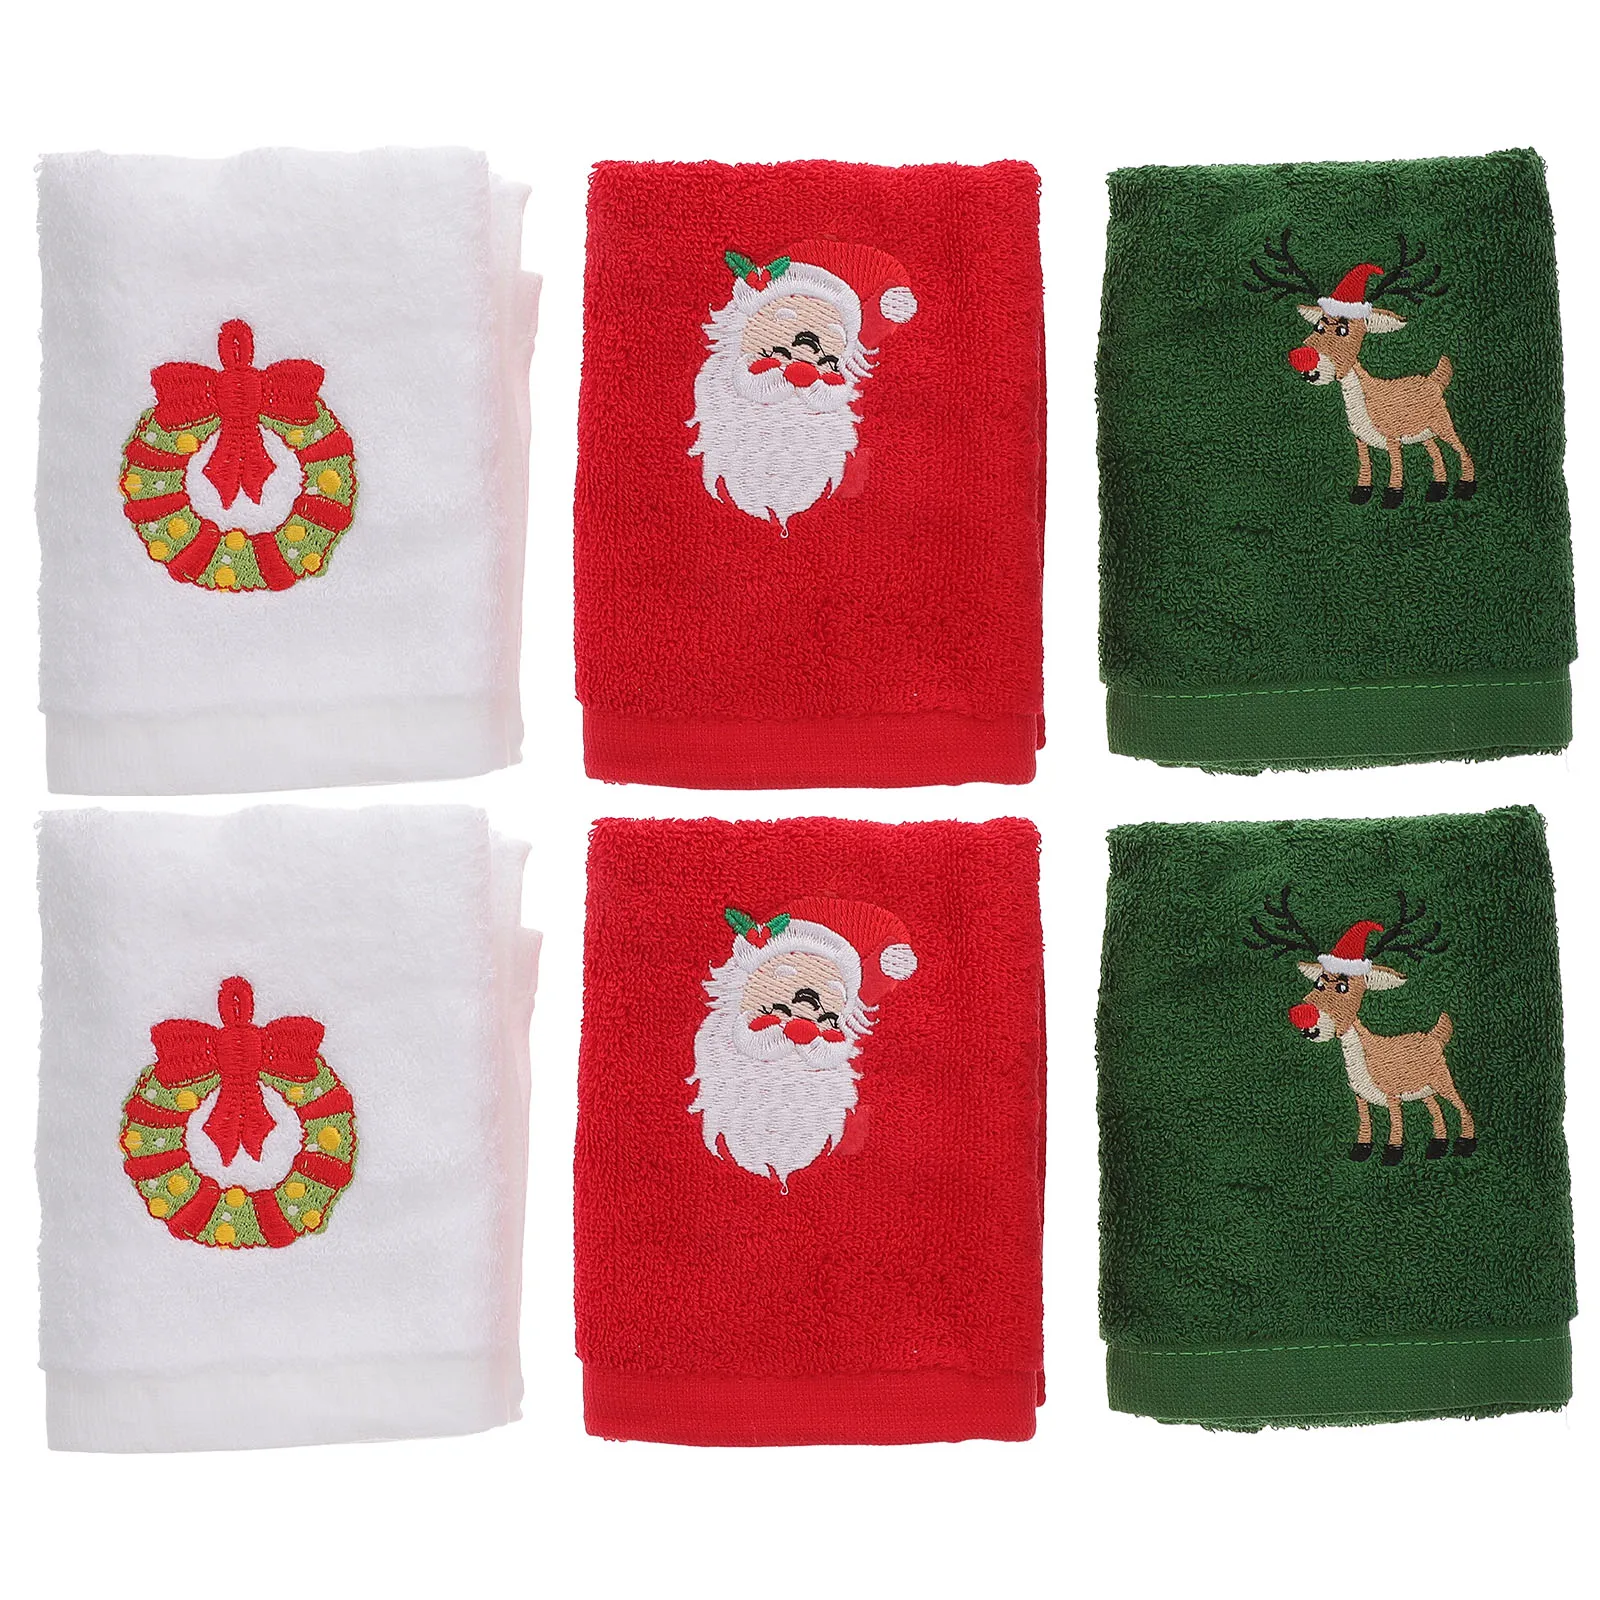 

6pcs Christmas Themed Towels Face Cleaning Towels Face Cleasning Cotton Towels Christmas Elements Design Supply (Assorted Color)